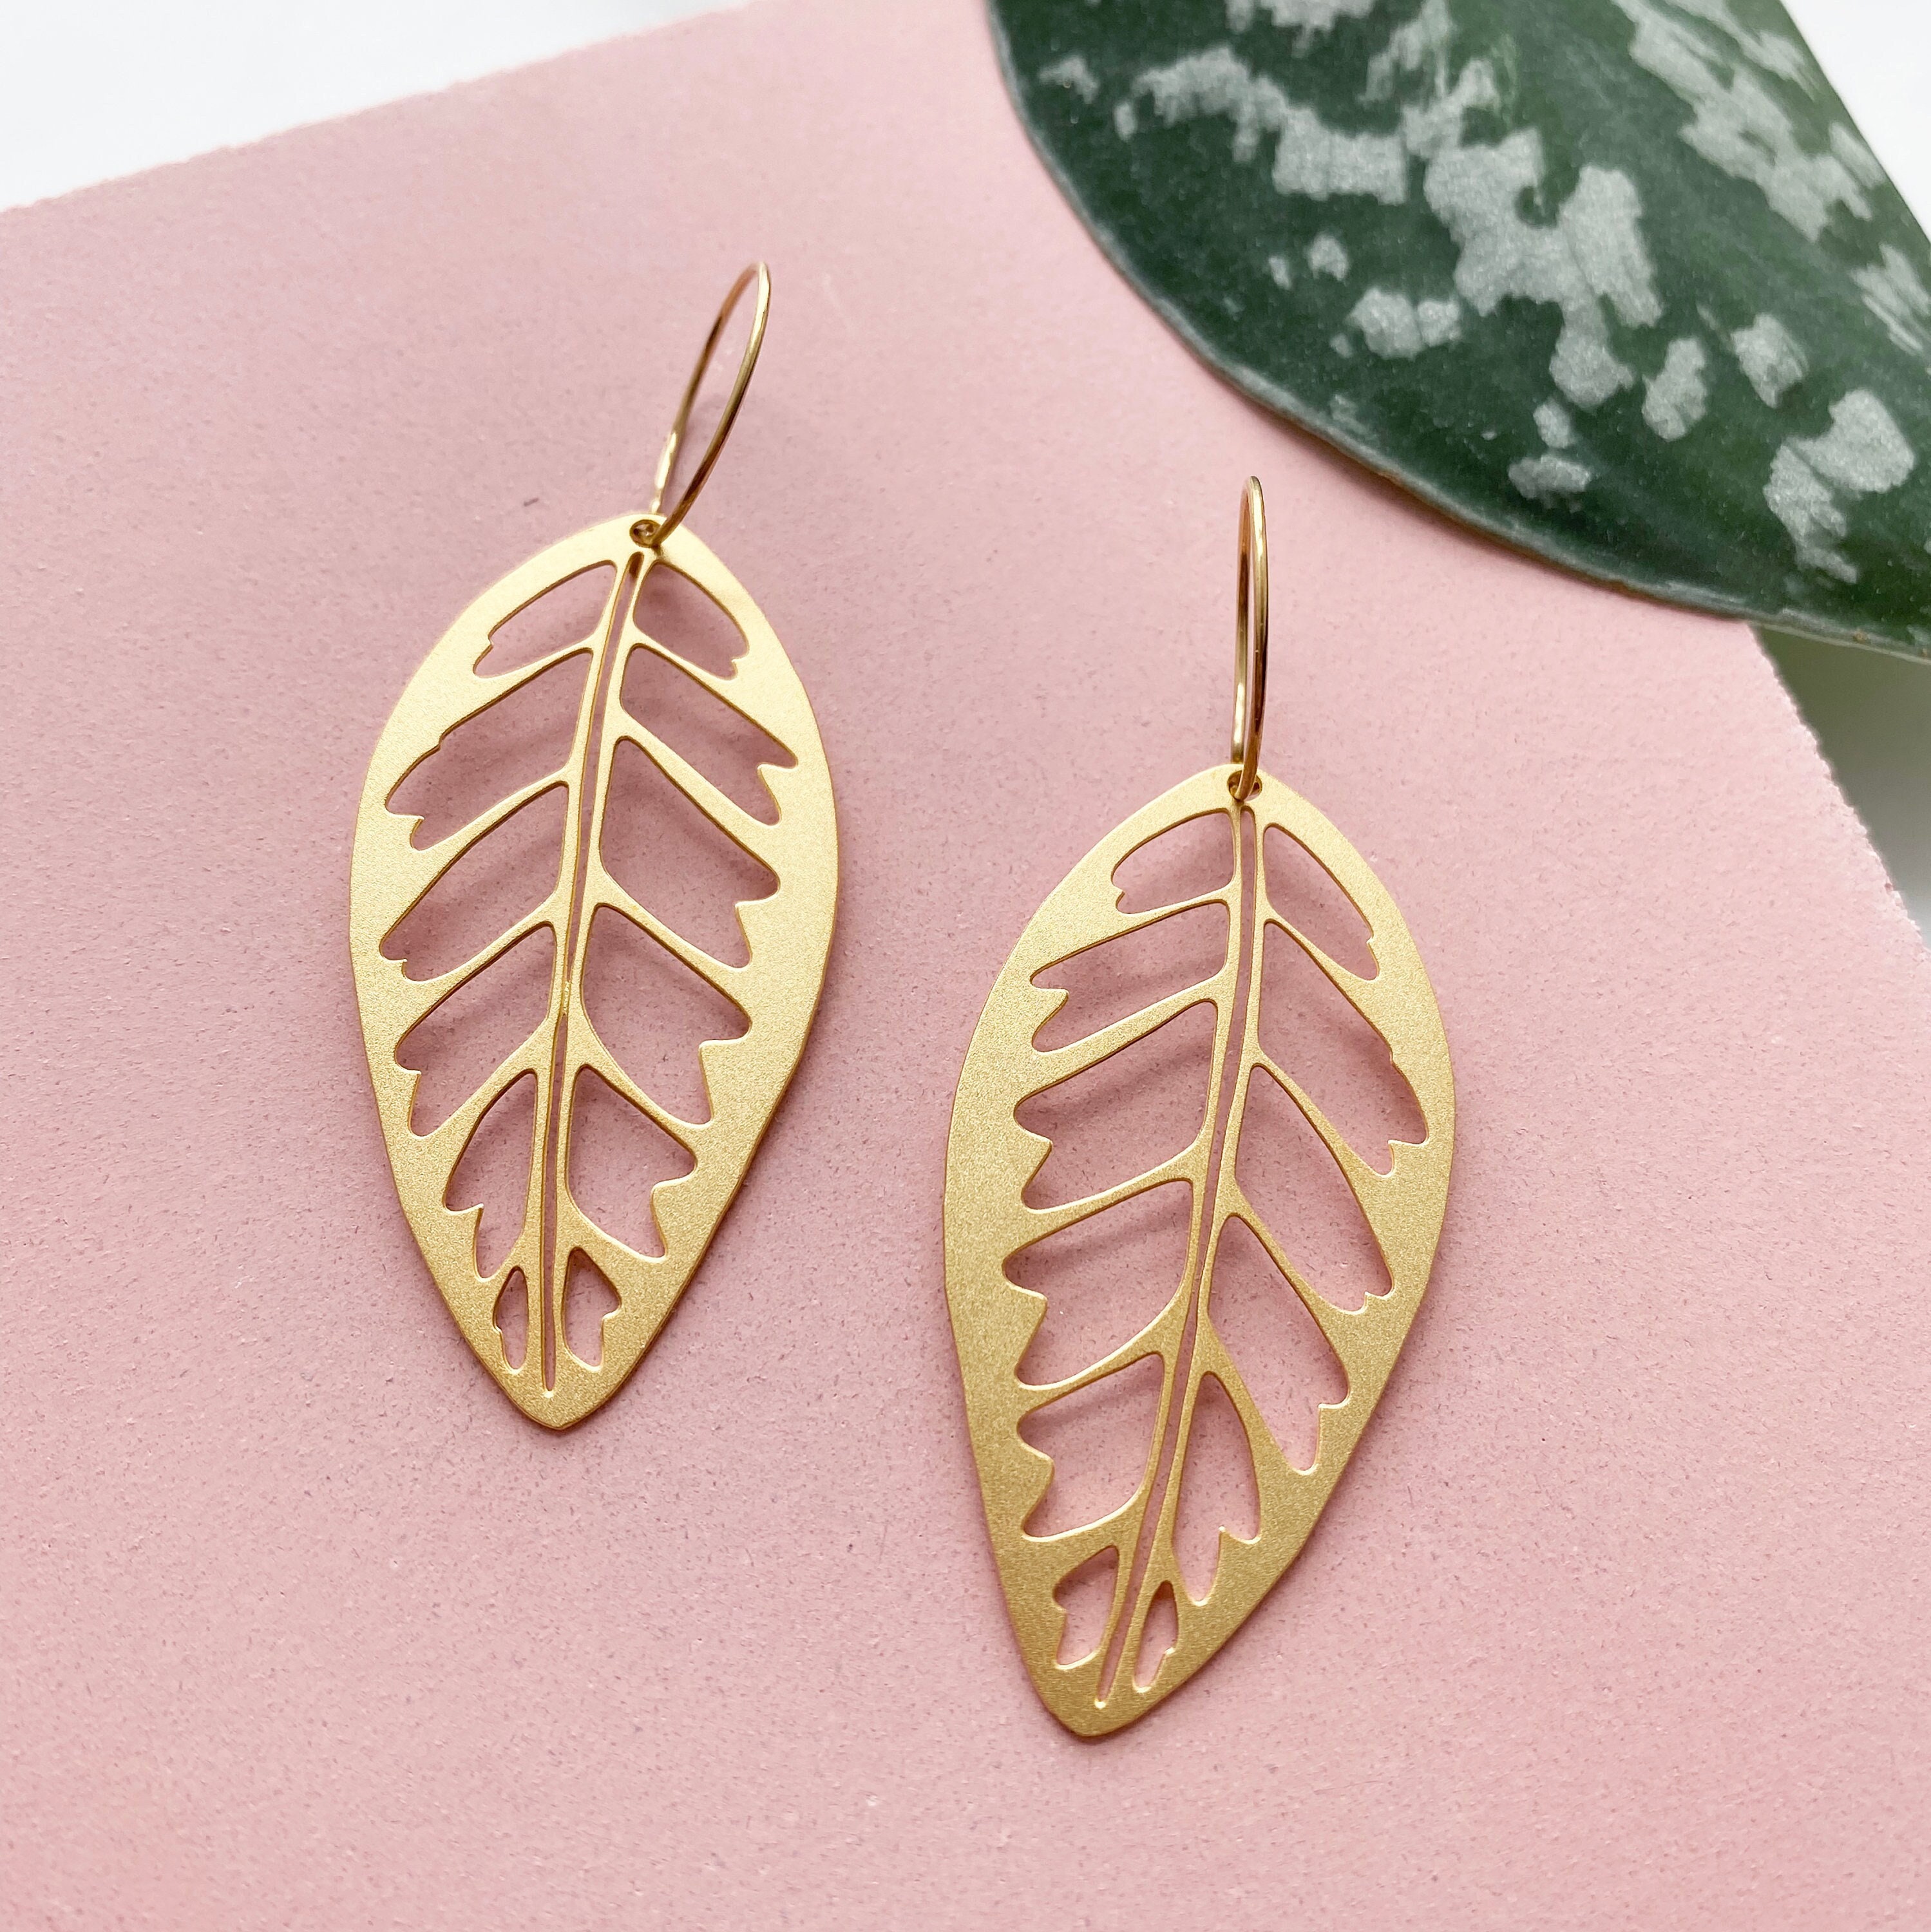 Tropical Gold Leaf Hoop Earrings - House Plant Delicate Dangle Statement